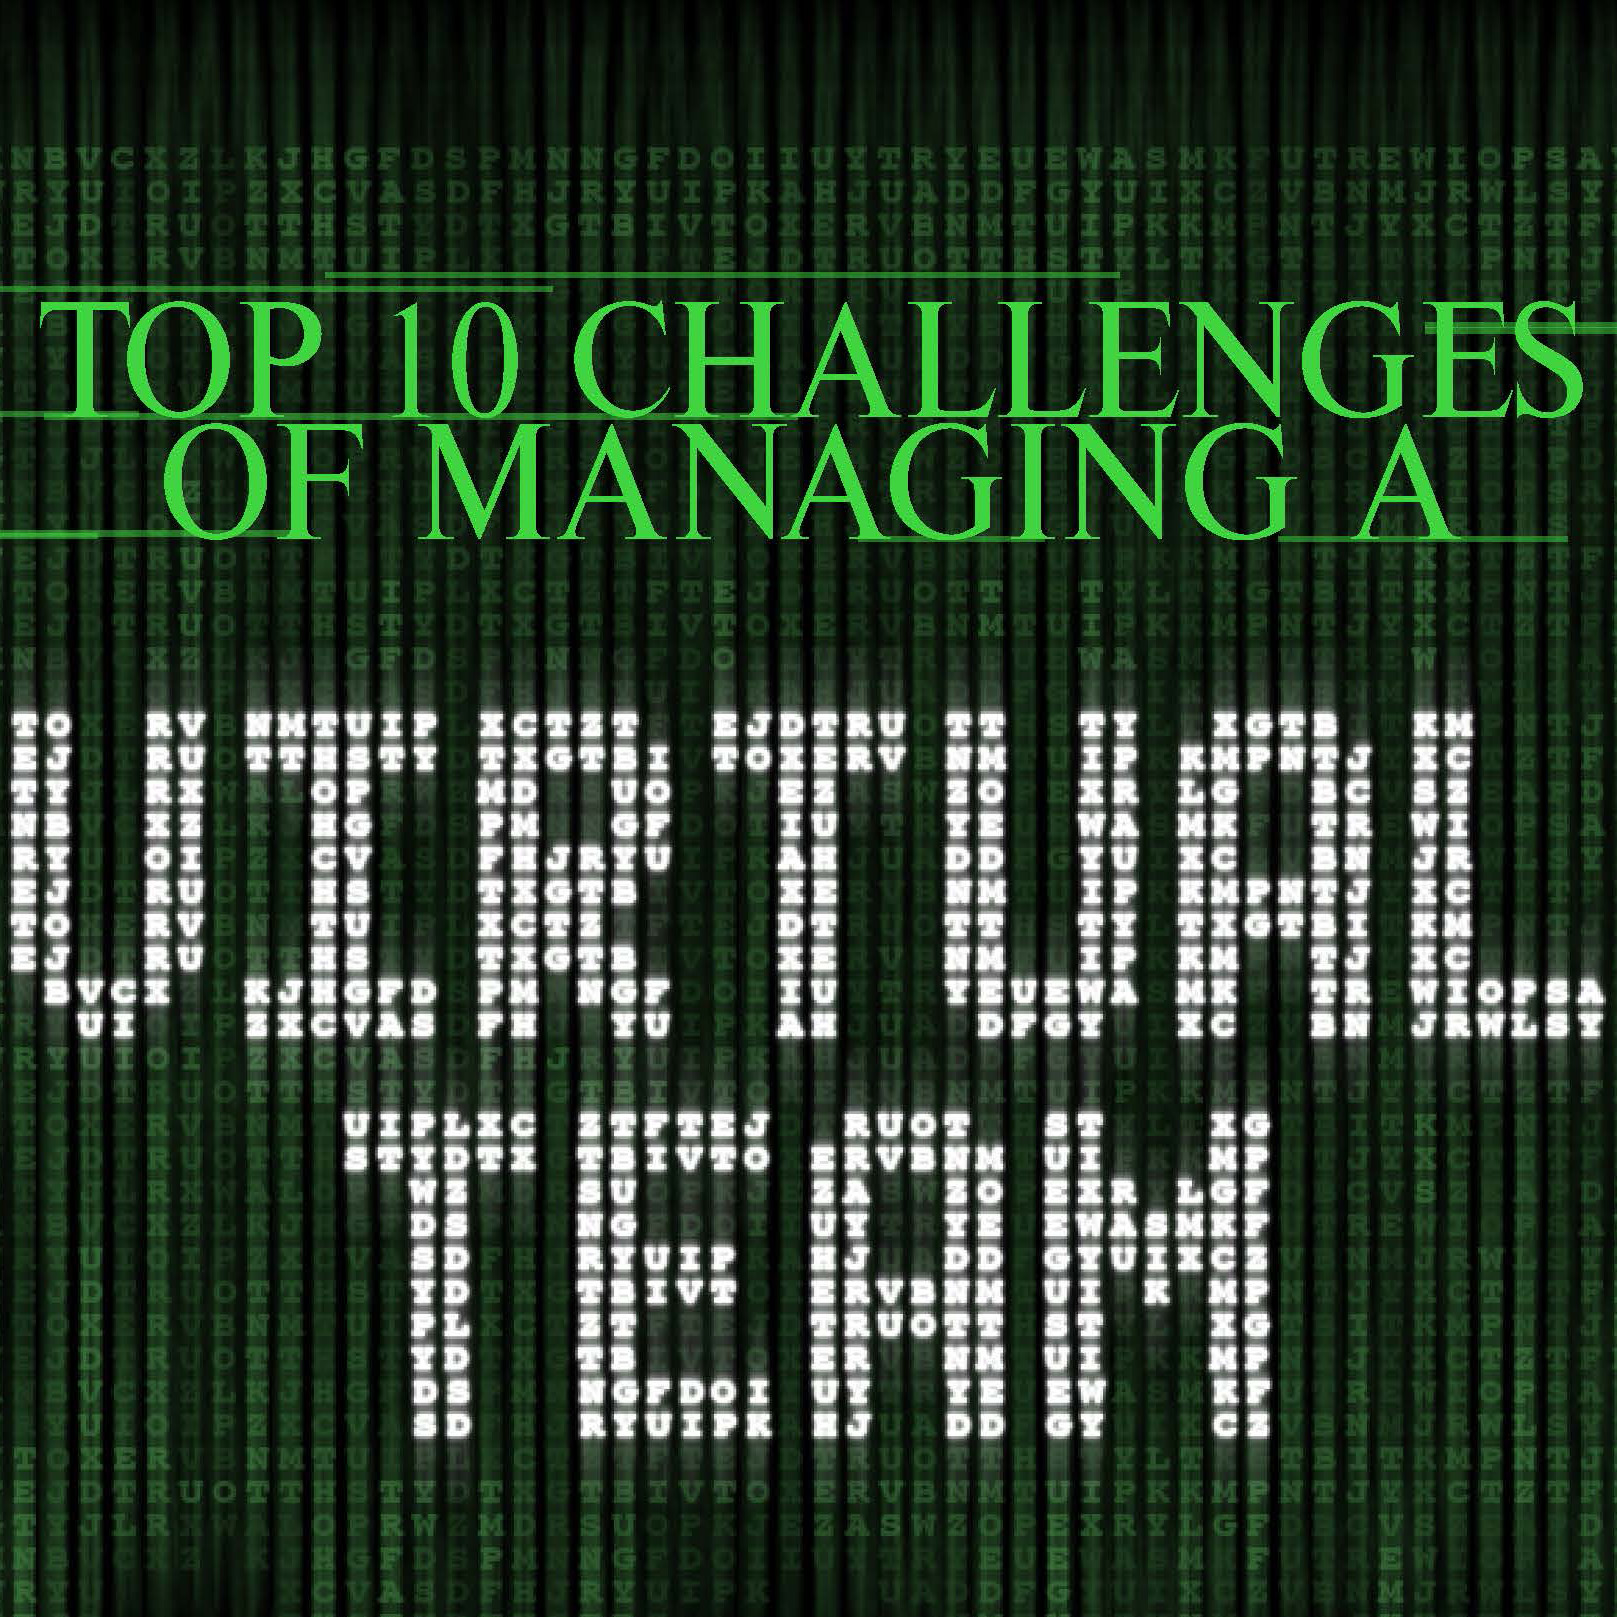 Top 10 Challenges of Managing a Virtual Team